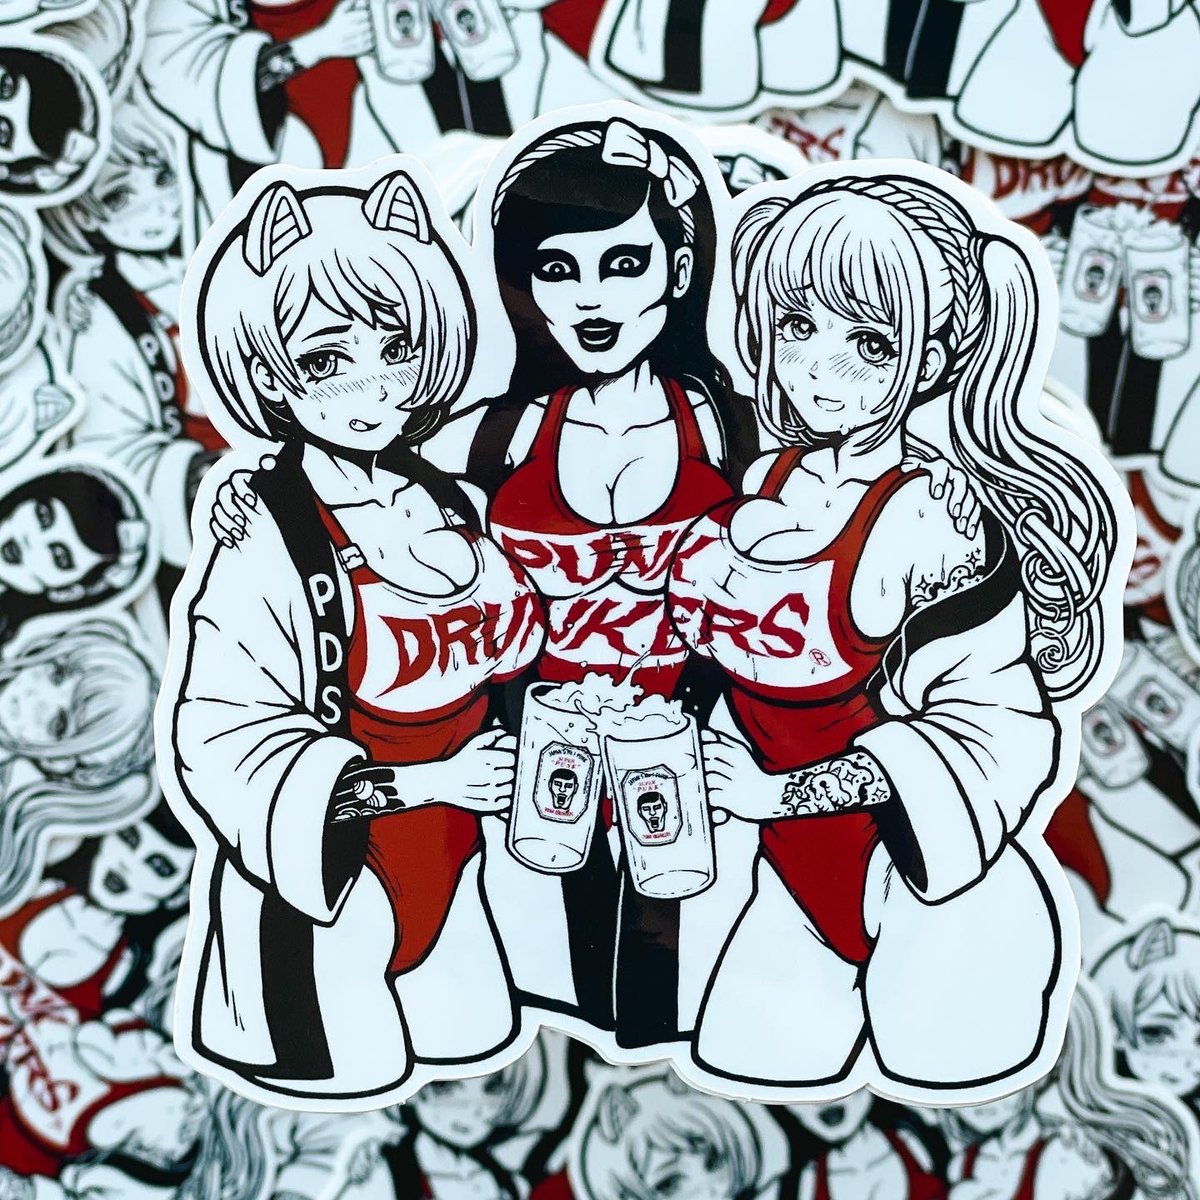 Image of Punk Drunkers Sticker Pack